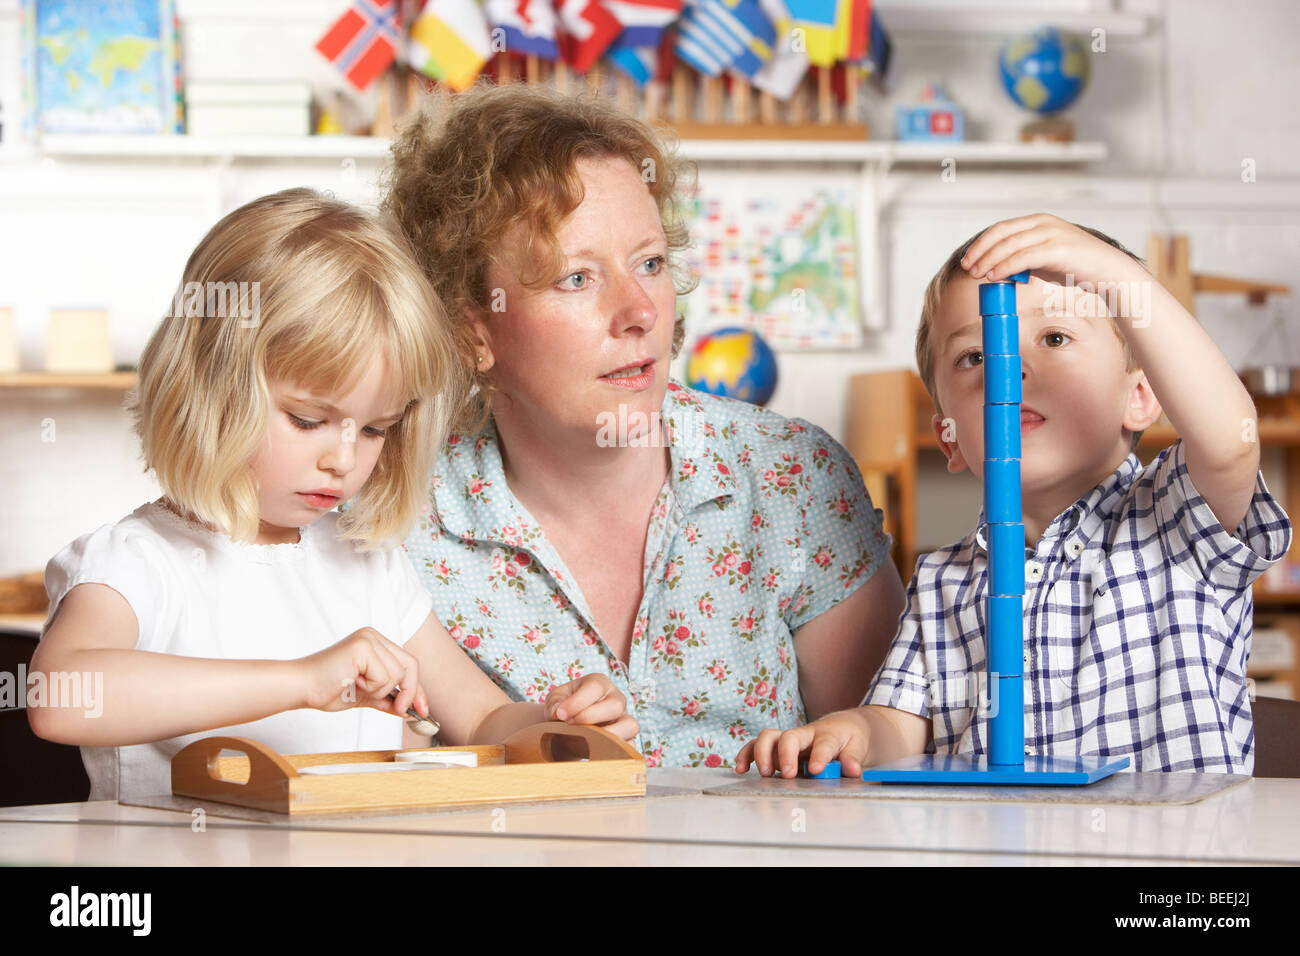 Adult Helping Two Young Children at Montessori/Pre-School Stock Photo